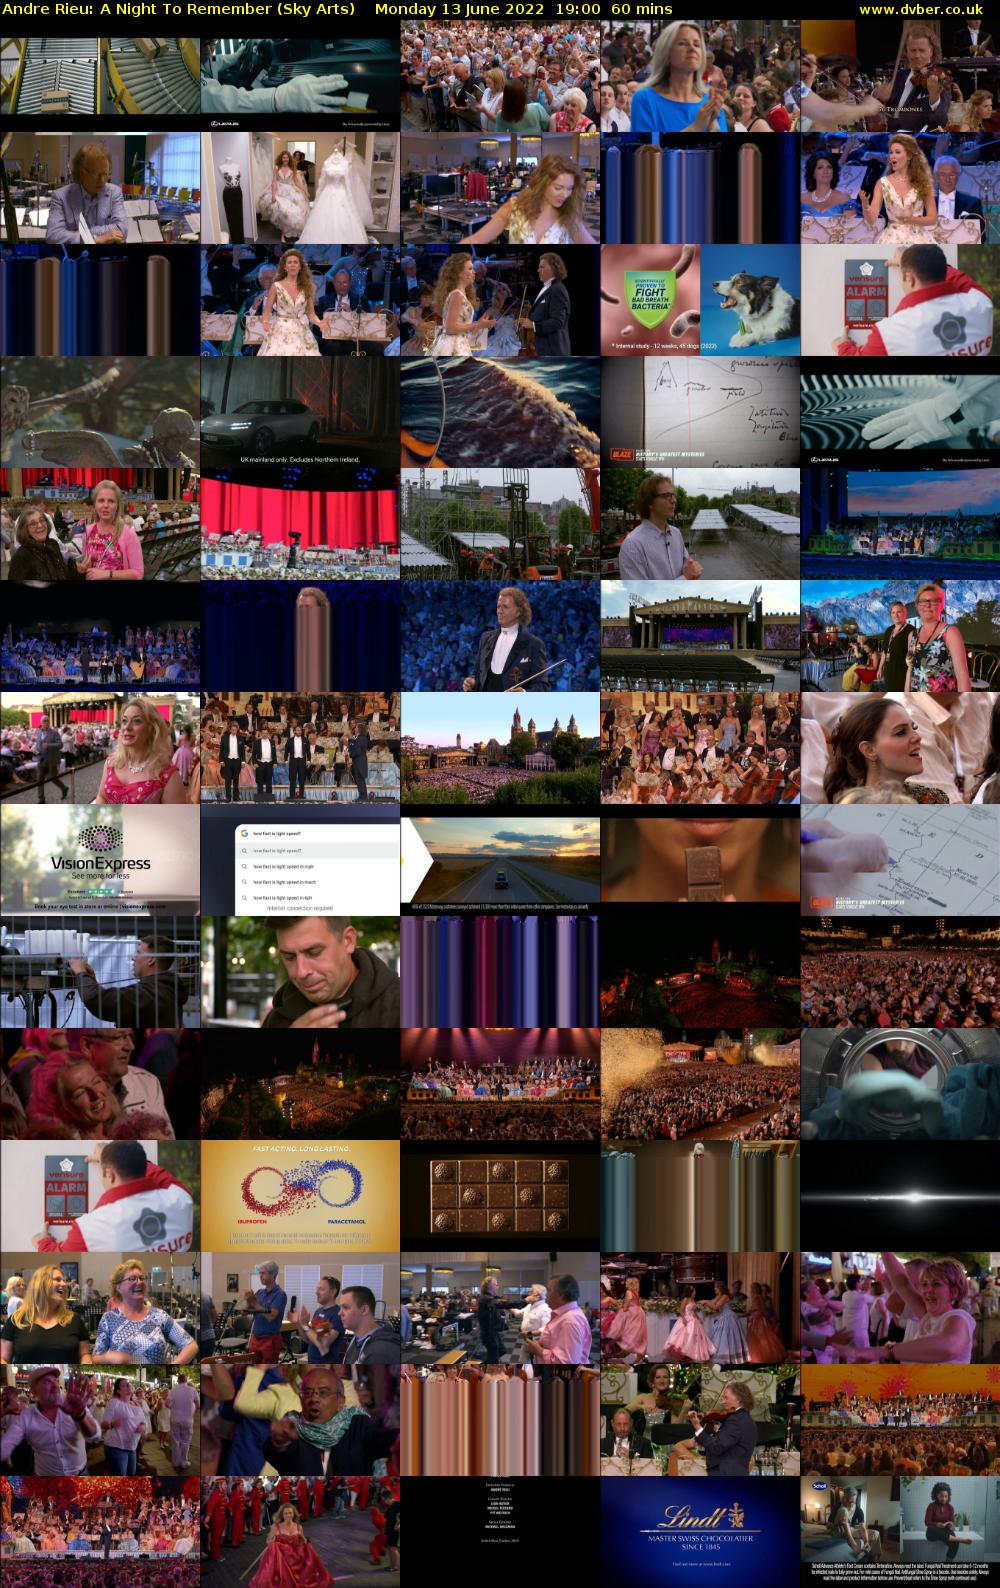 Andre Rieu: A Night To Remember (Sky Arts) Monday 13 June 2022 19:00 - 20:00